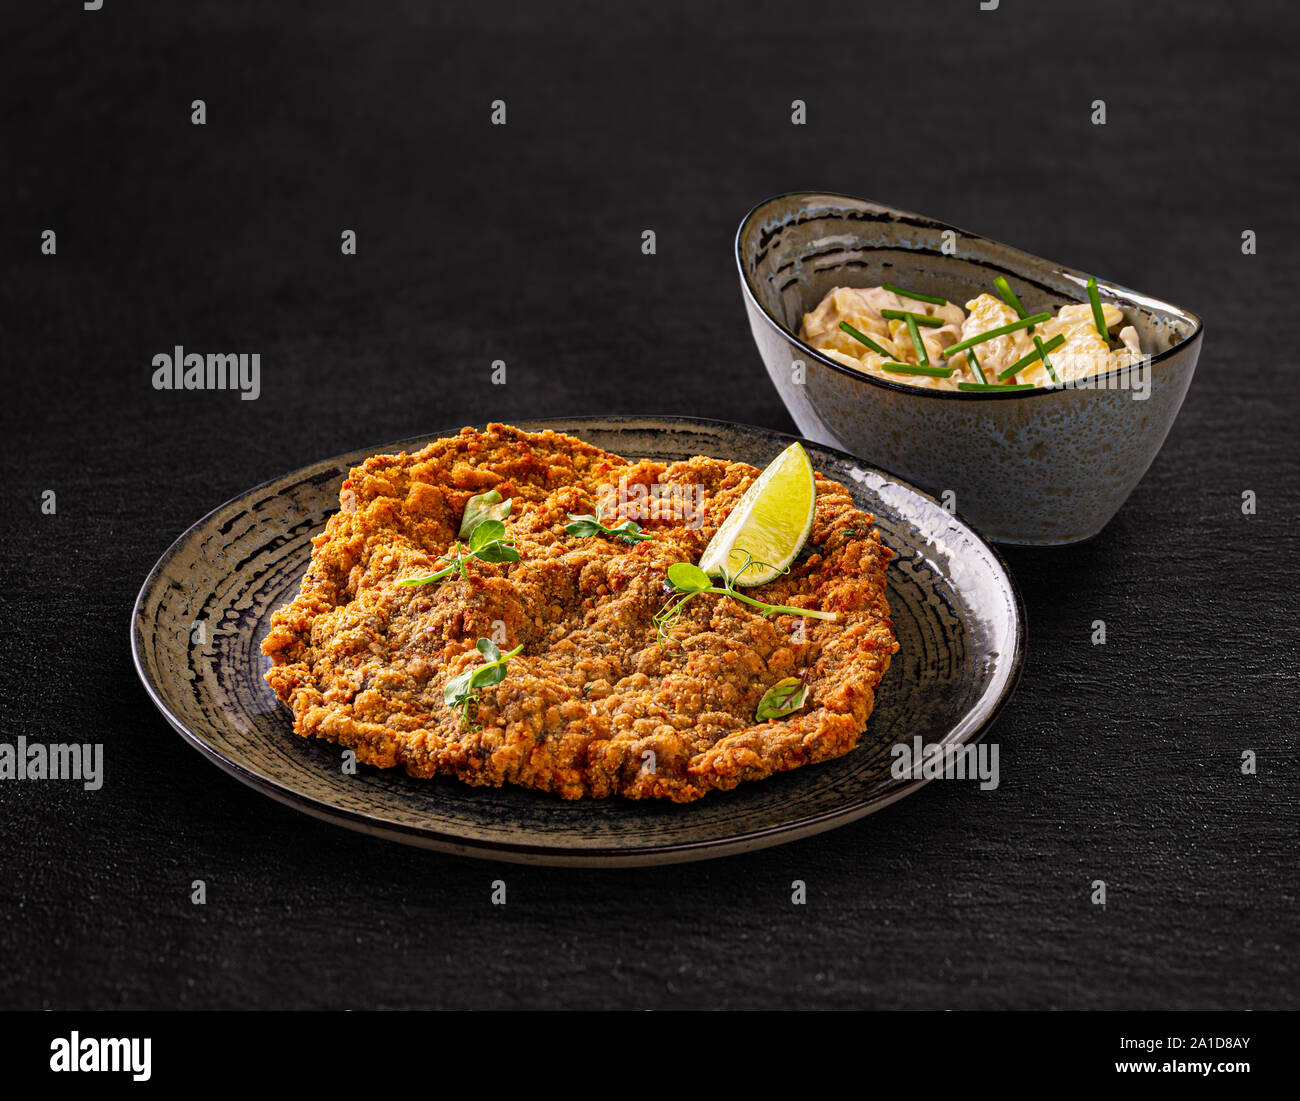 Giant veal viennese schnitzel served with potato salad with chives Stock Photo